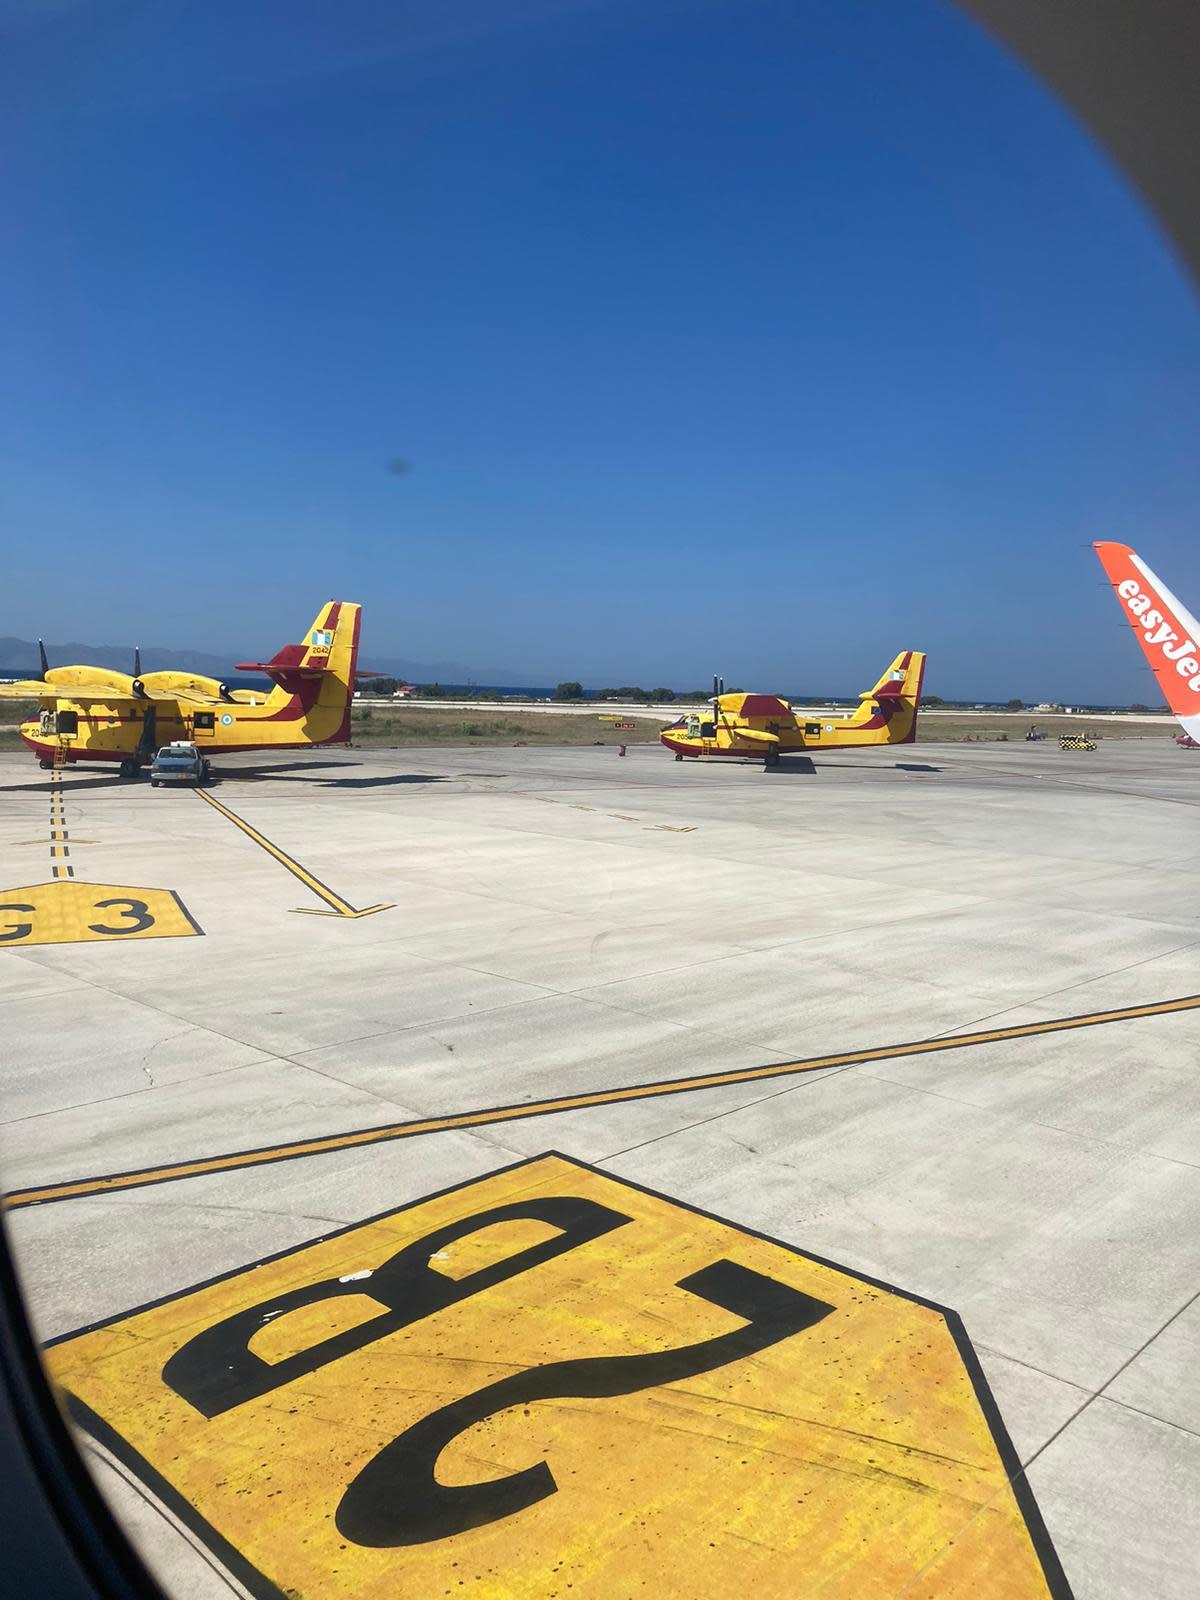 Firefighting planes sit on the tarmac (Andy Gregory)